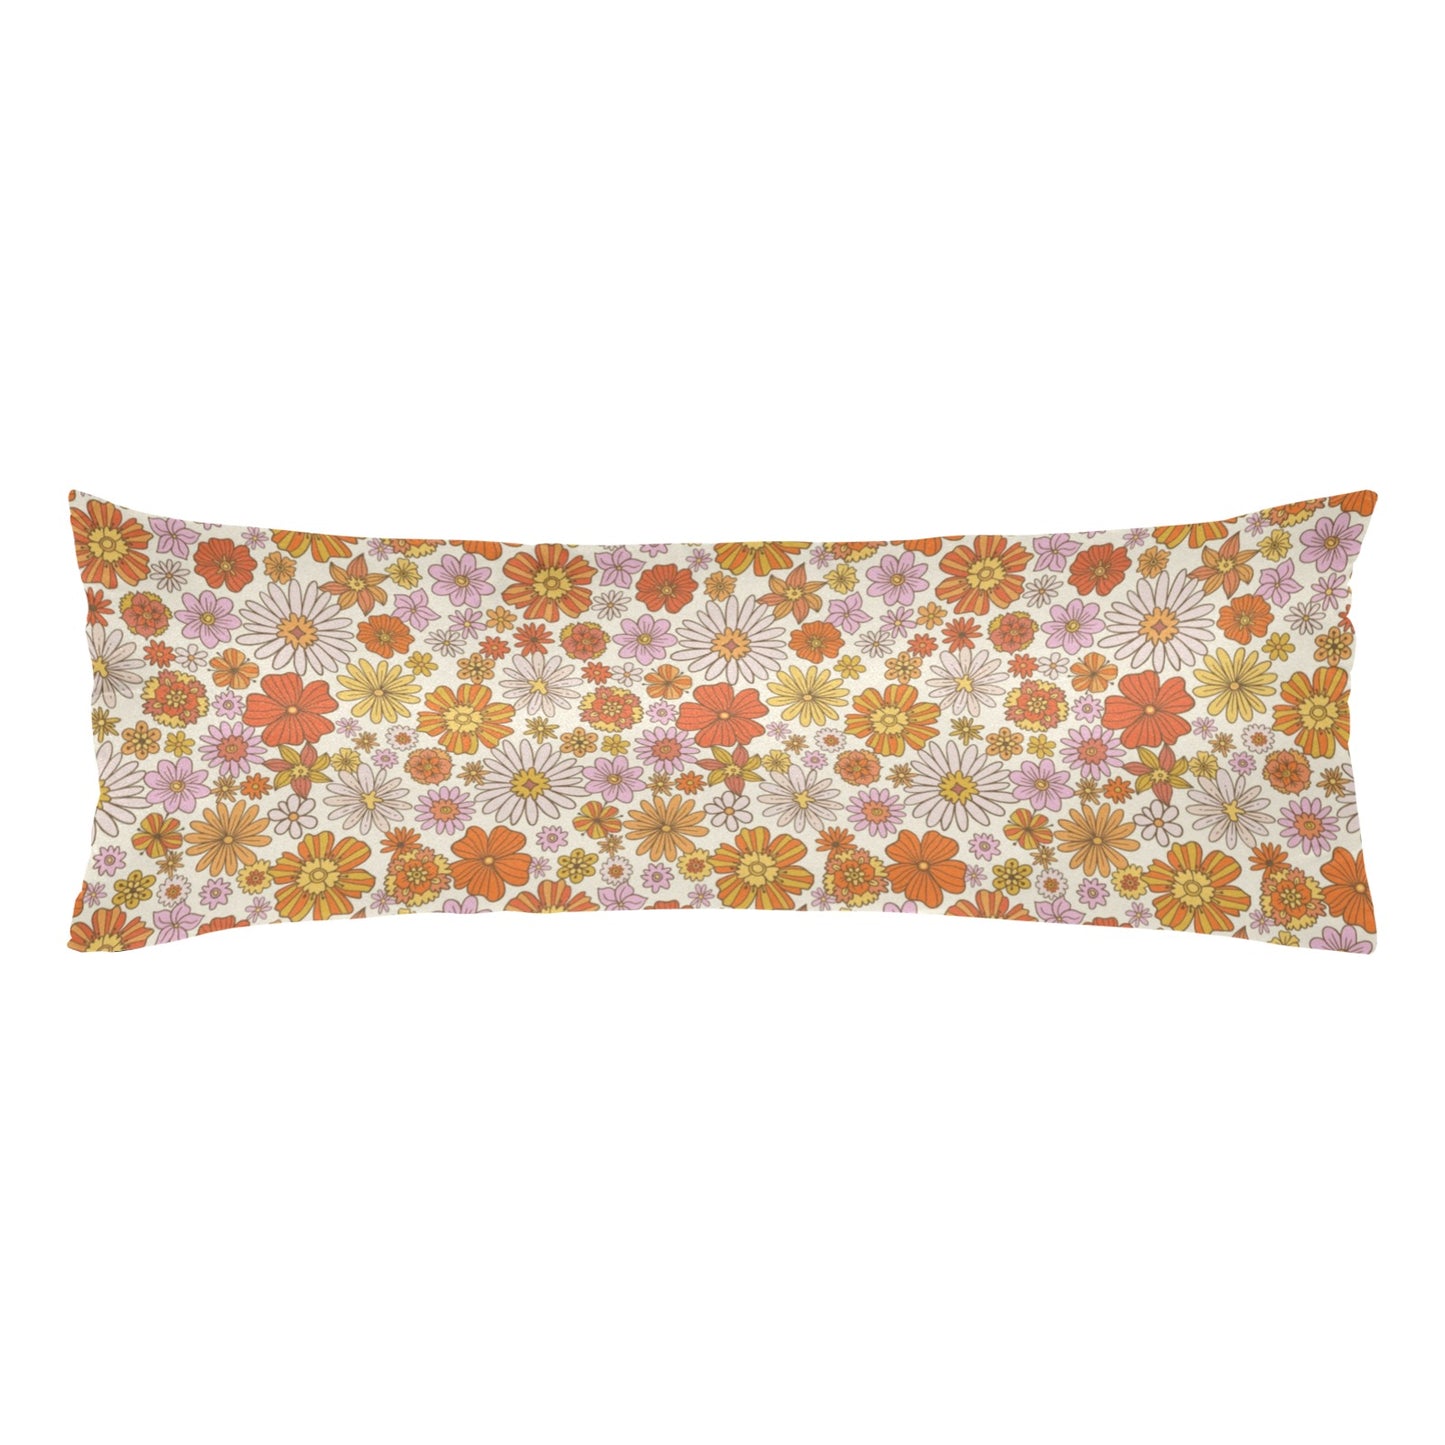 Groovy flowers Body Pillow Case, Boho Retro 70s Floral Funky Orange Long Large Bed Accent Print Throw Decor Decorative Cover 20x54 Starcove Fashion